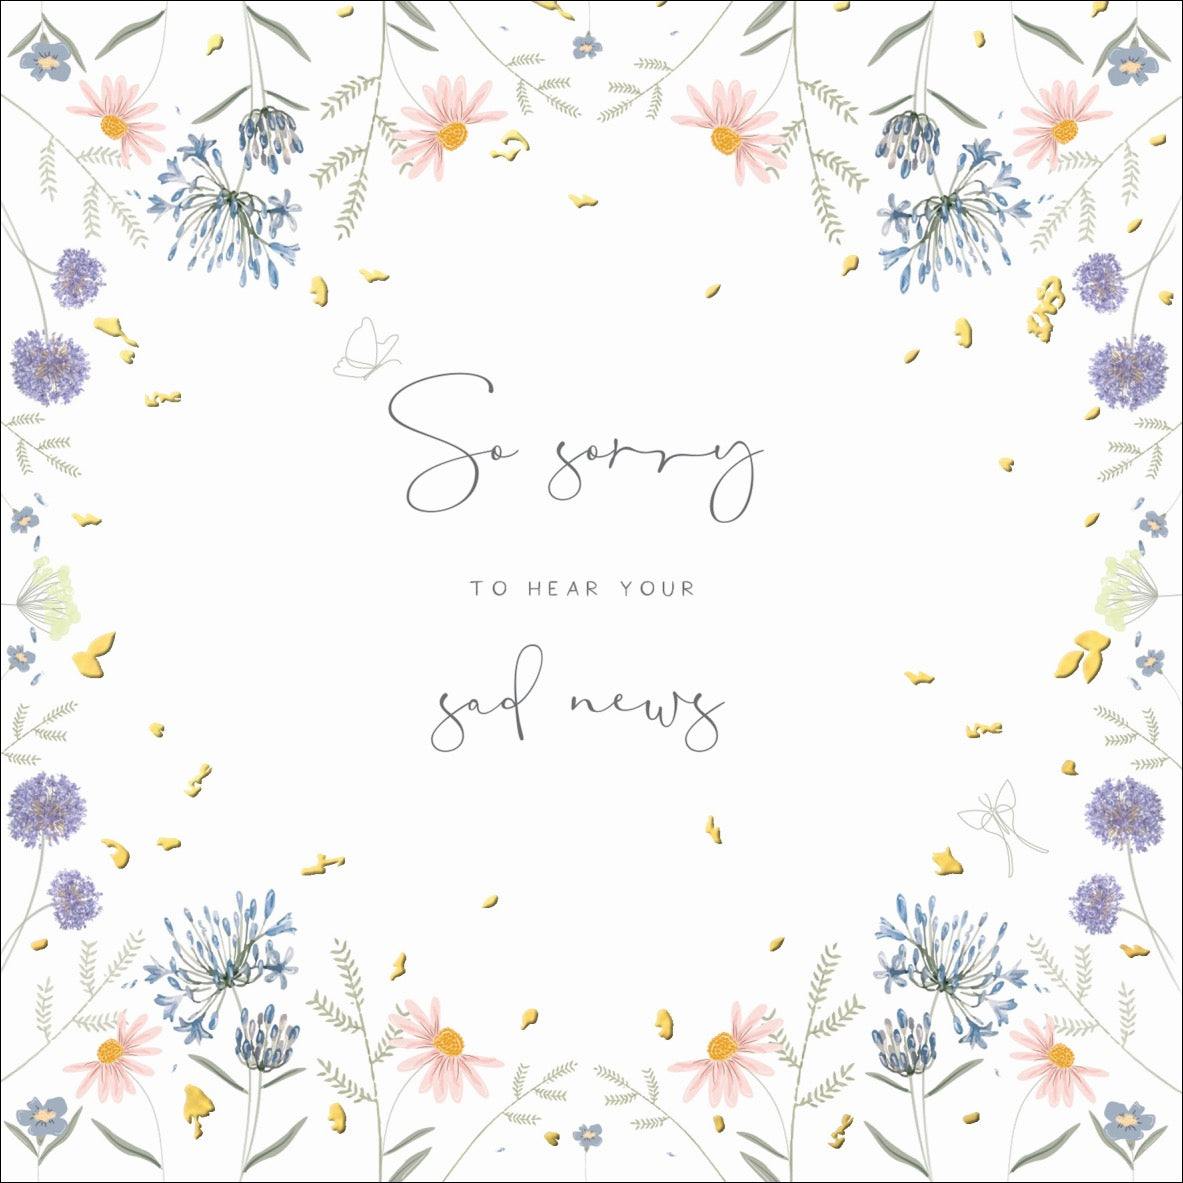 So Sorry to Hear Your Sad News Meadow Floral Blank Card